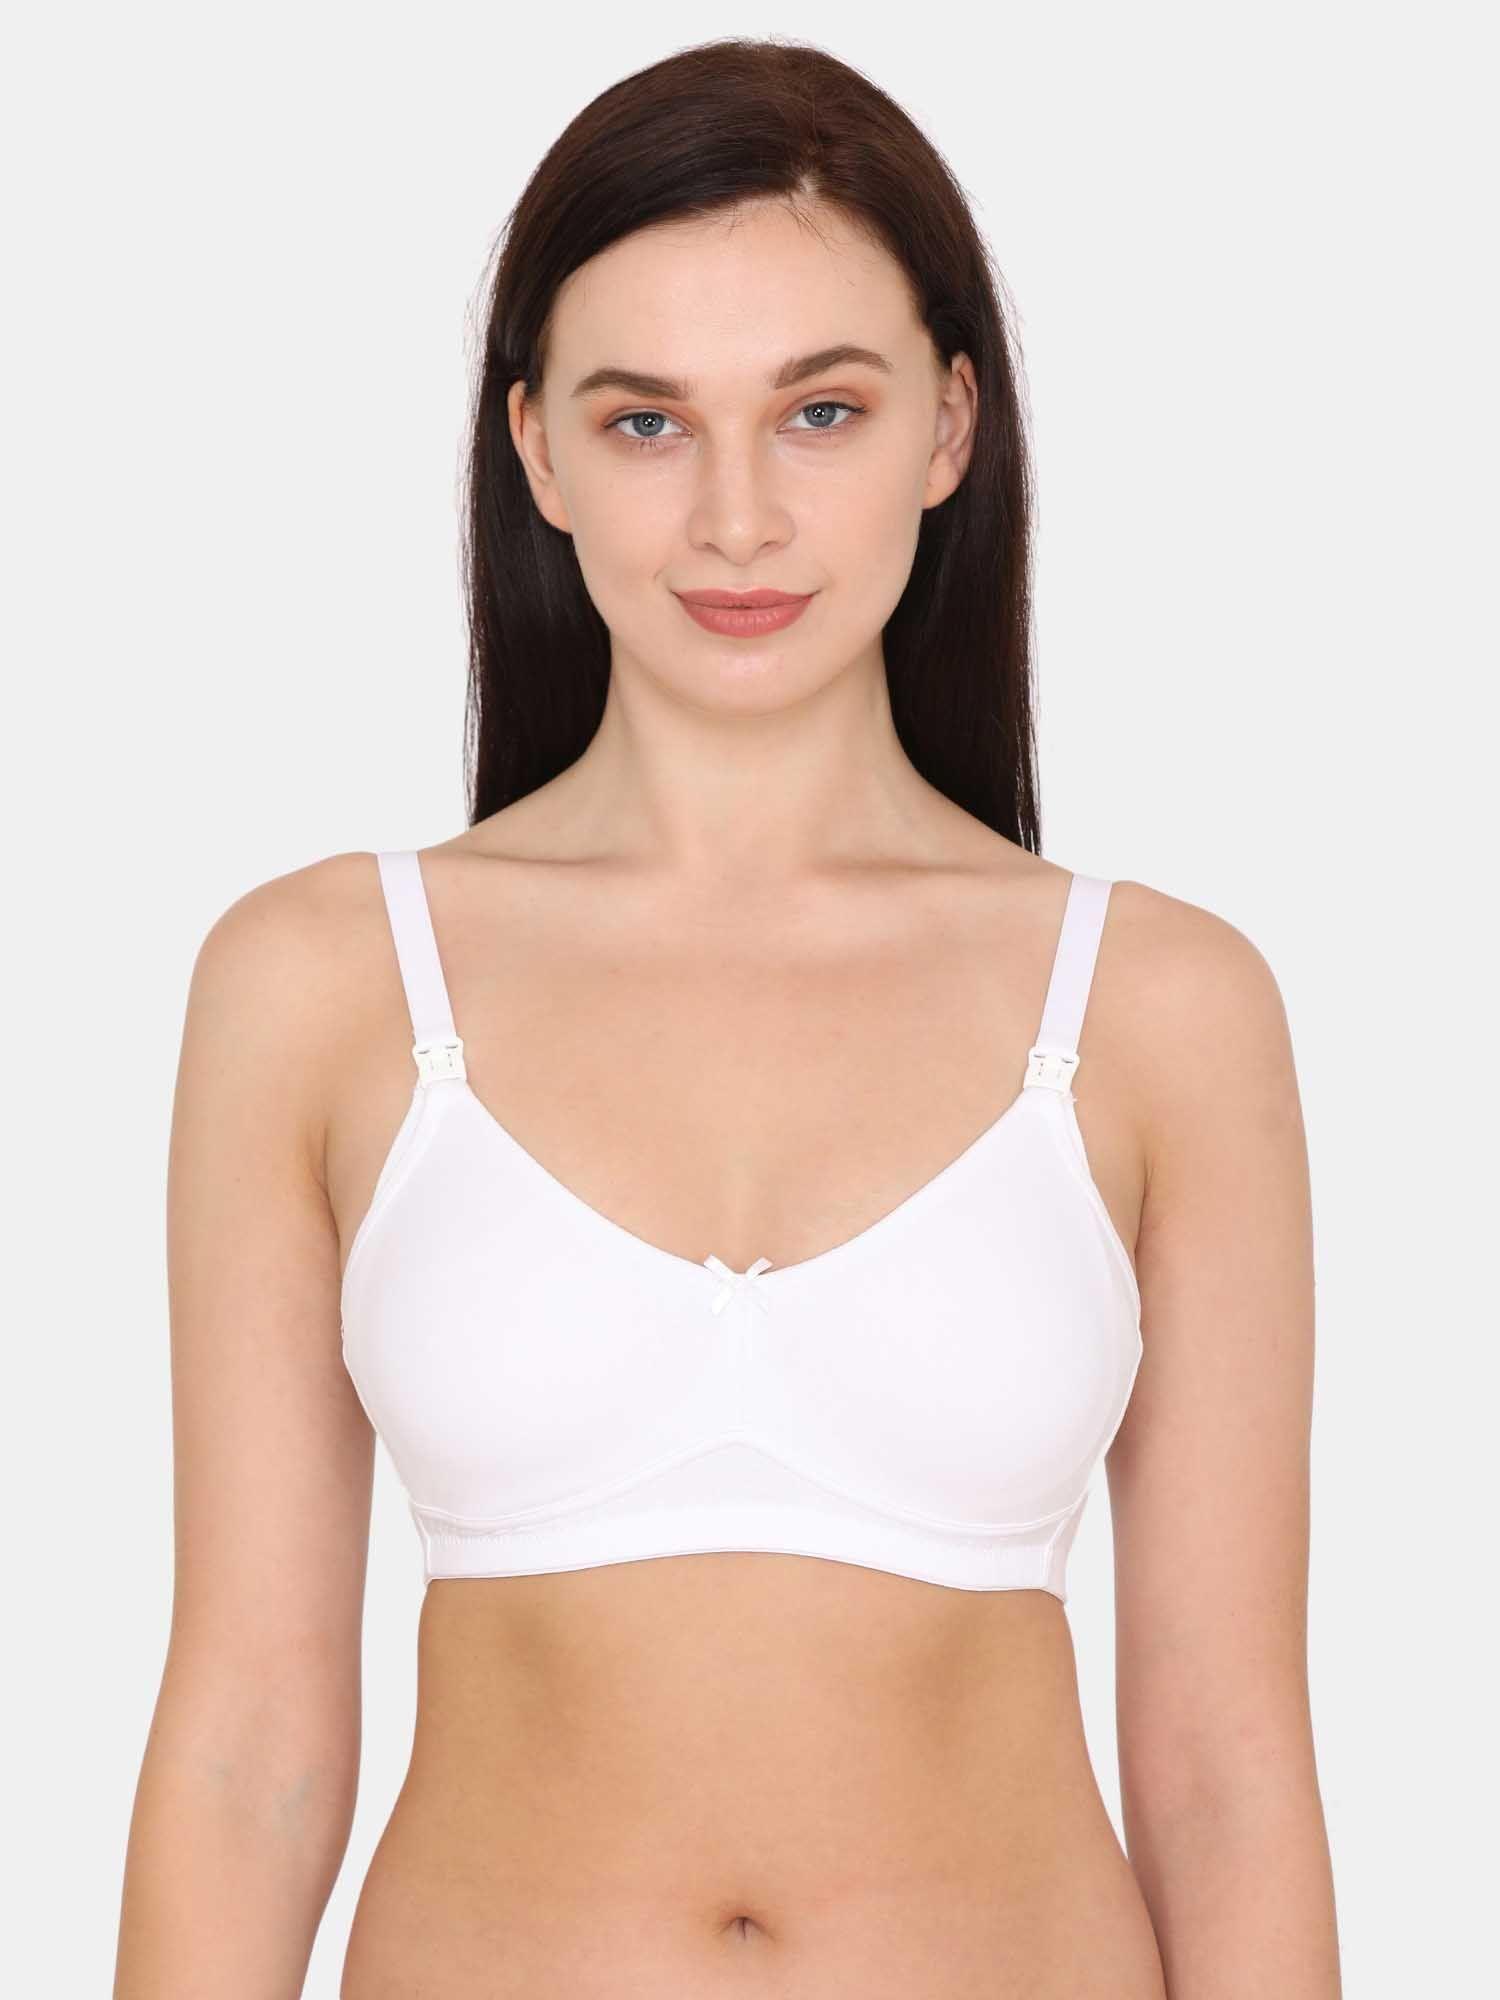 curvy double layered non wired full coverage maternity bra supper support bra - white